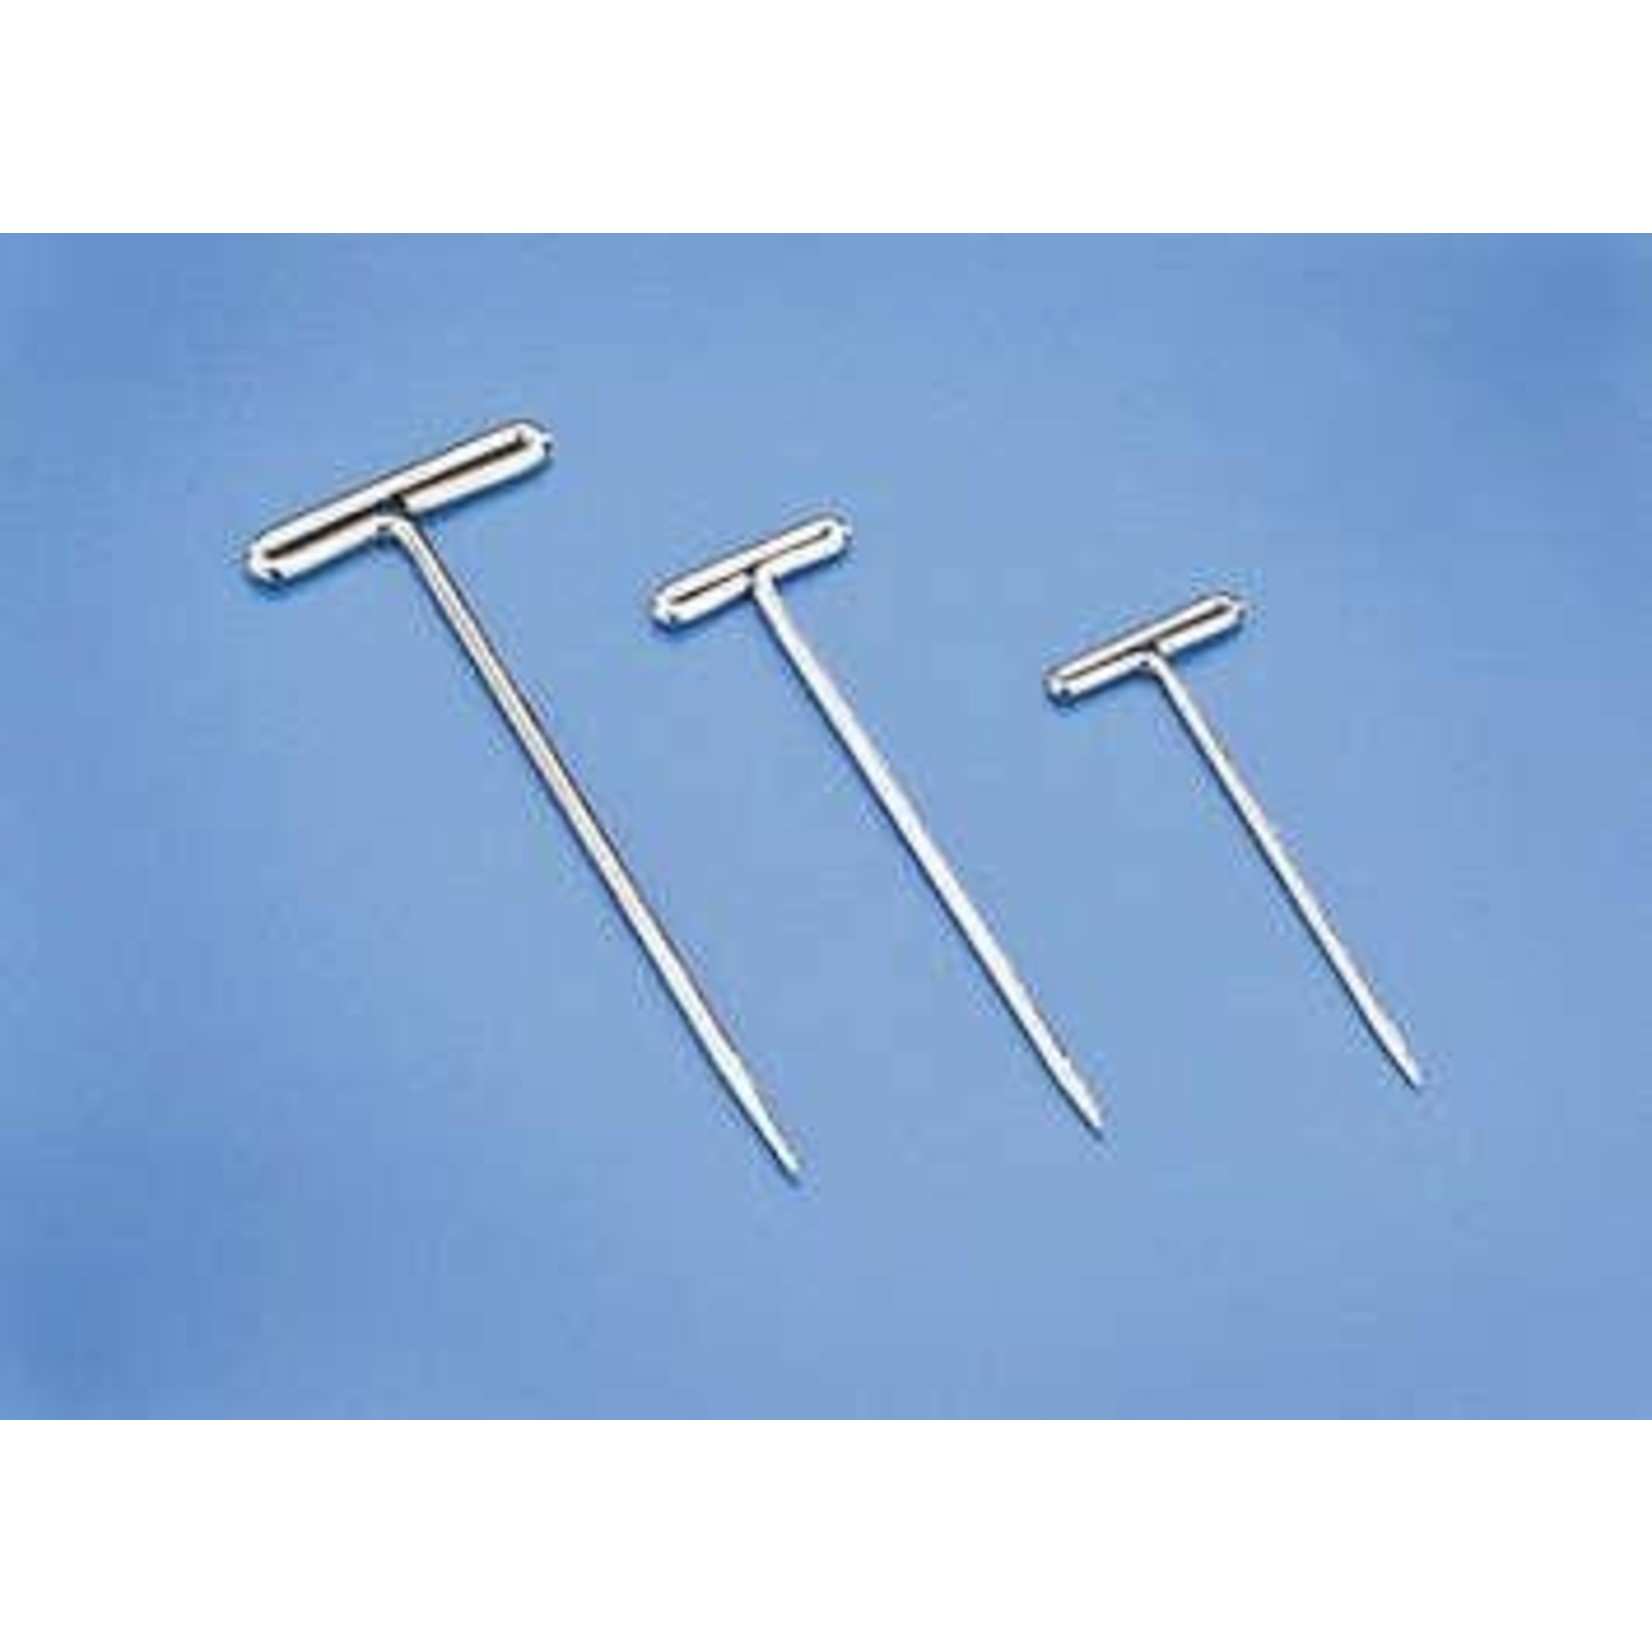 Dubro 1 1/4" Nickel Plated T-Pins 100pc